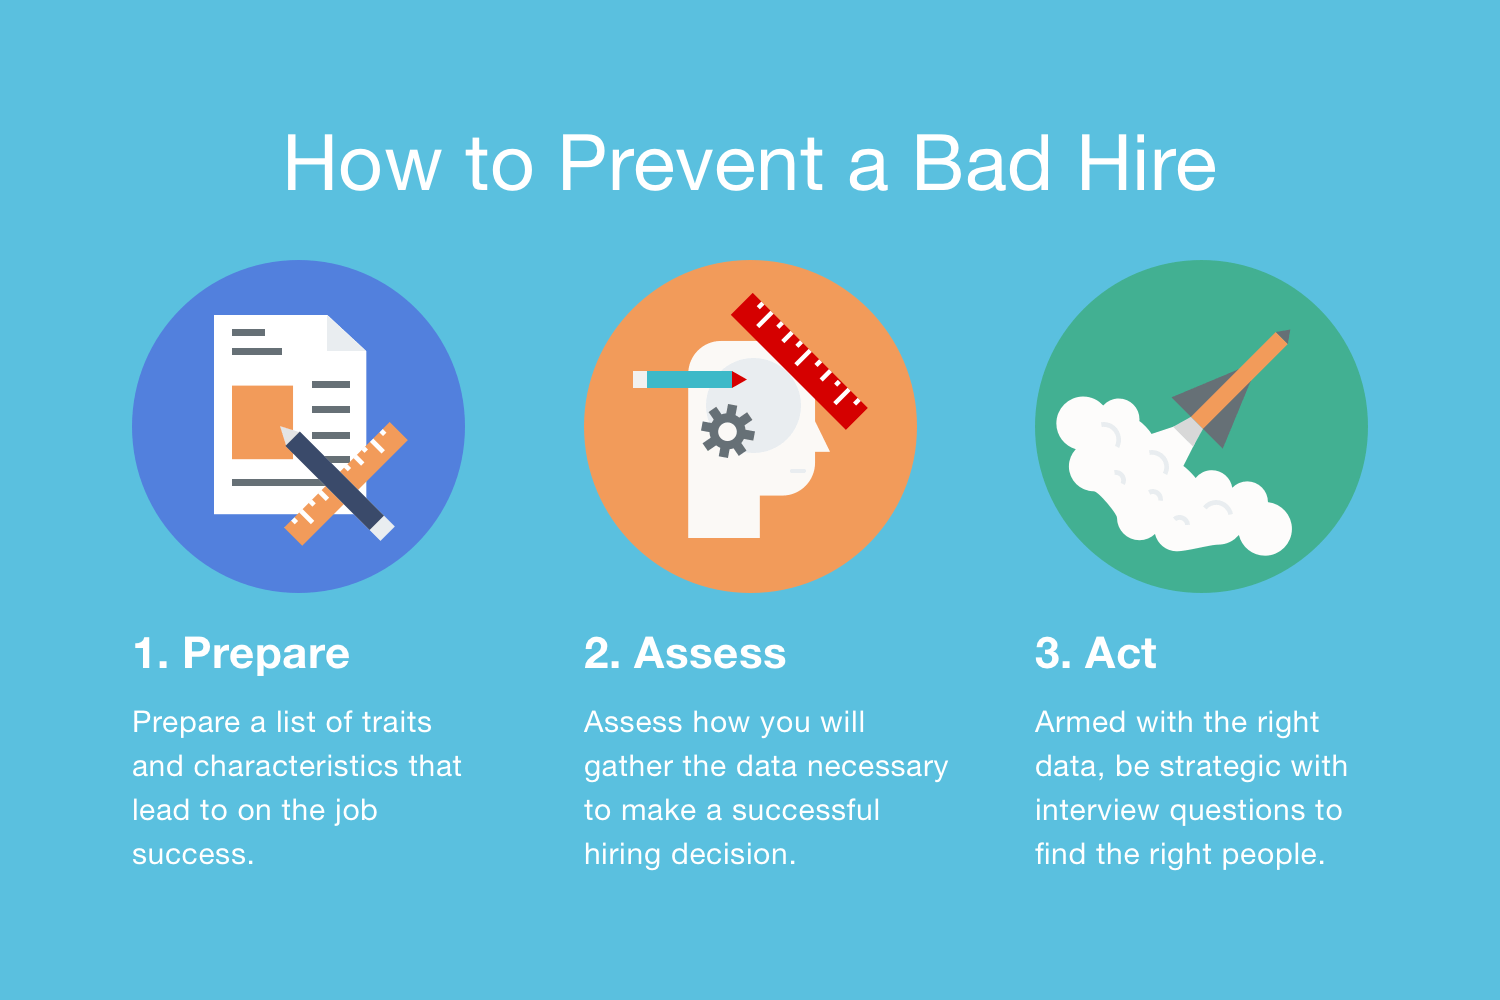 How to Prevent a Bad Hire: Prepare, Assess, Act